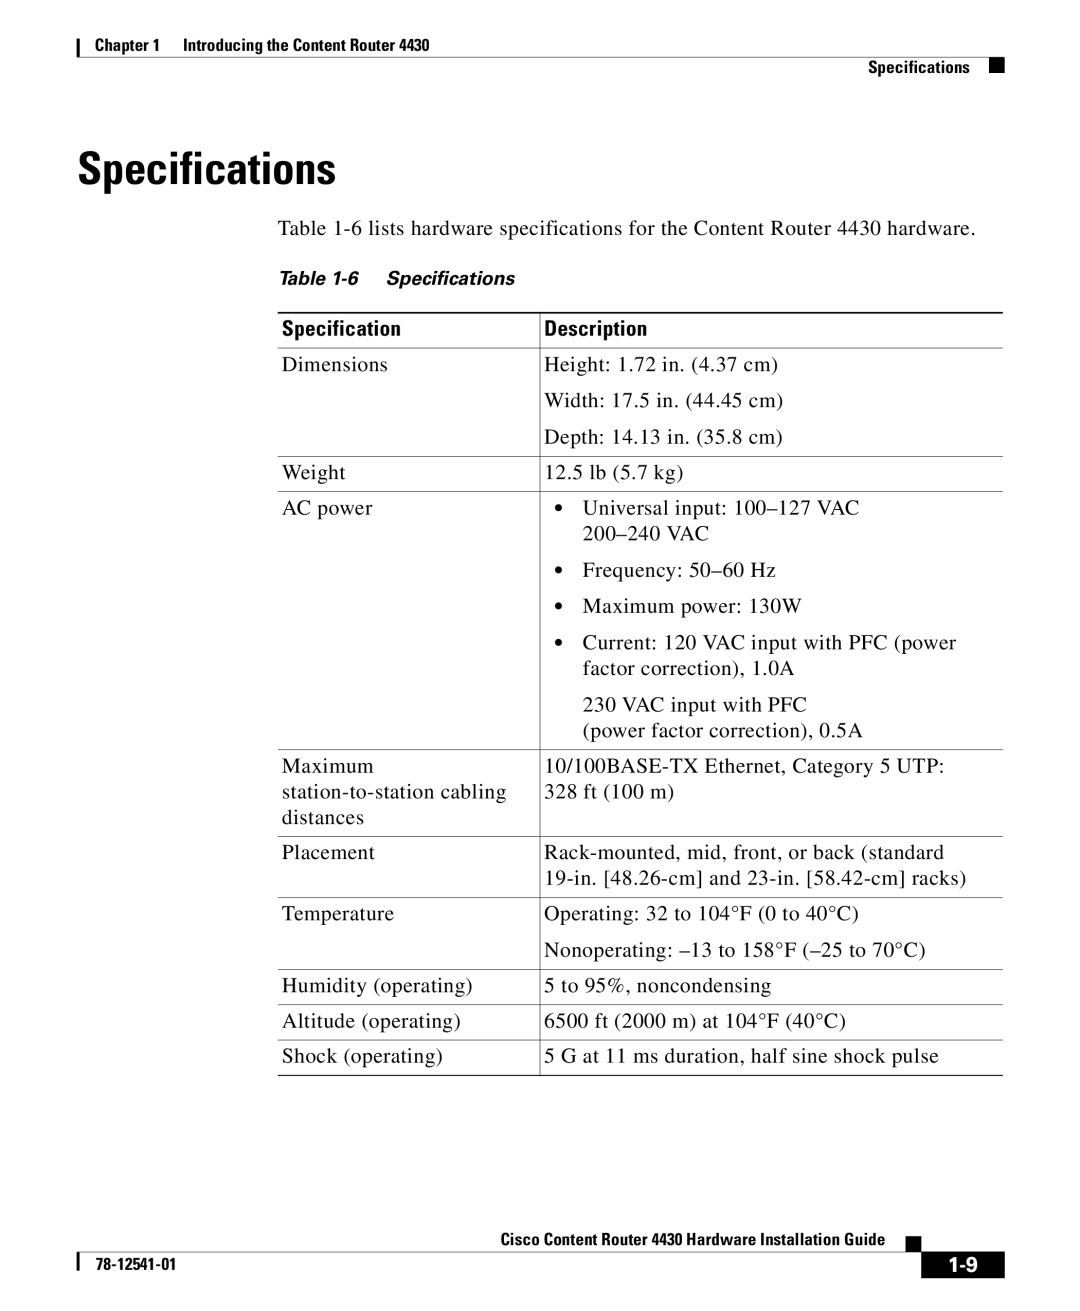 Cisco Systems 4430 specifications Specifications 